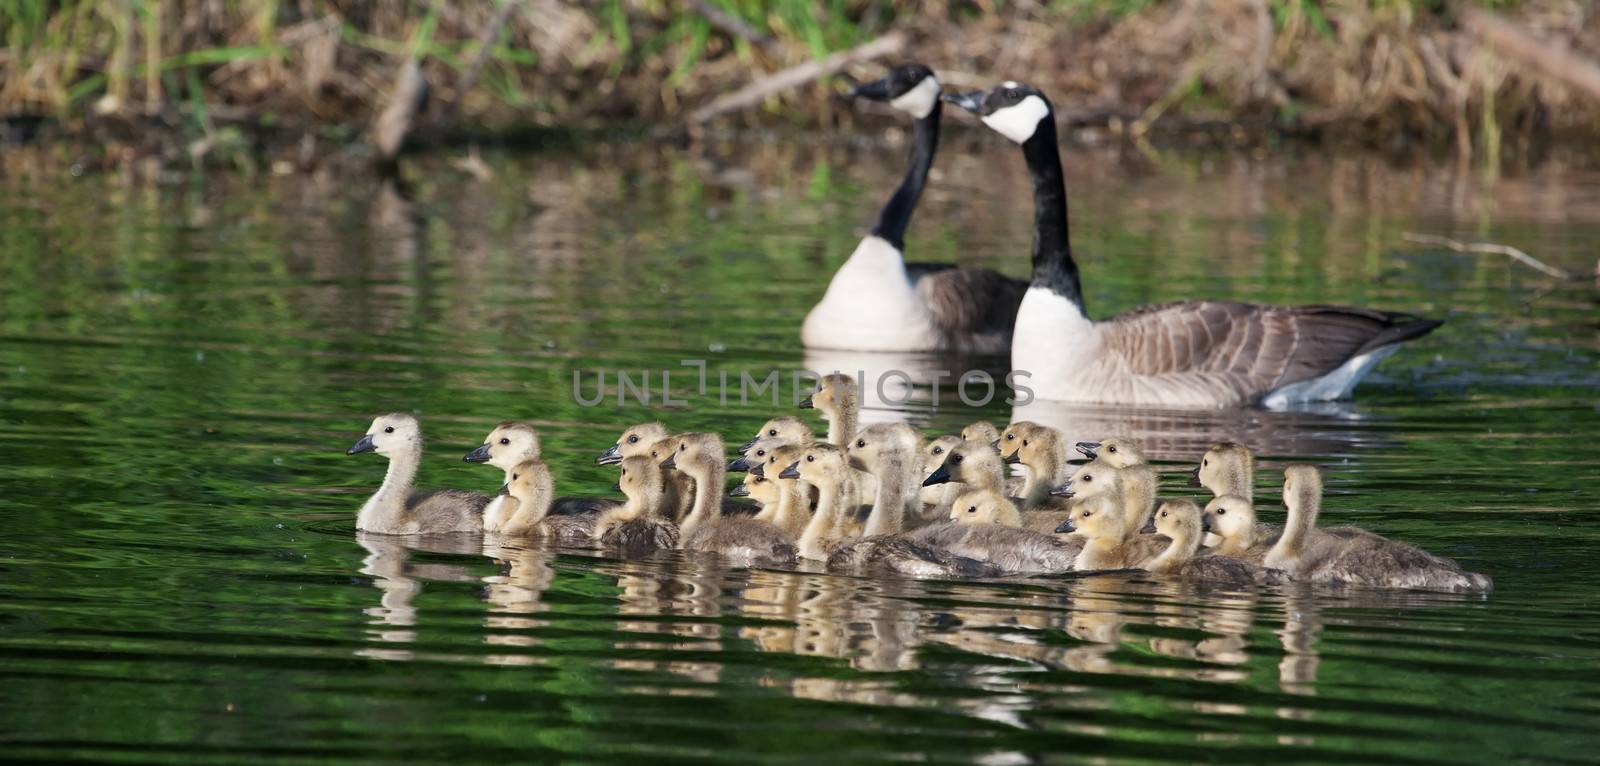 A group of Canadian goslings swimming together by Coffee999